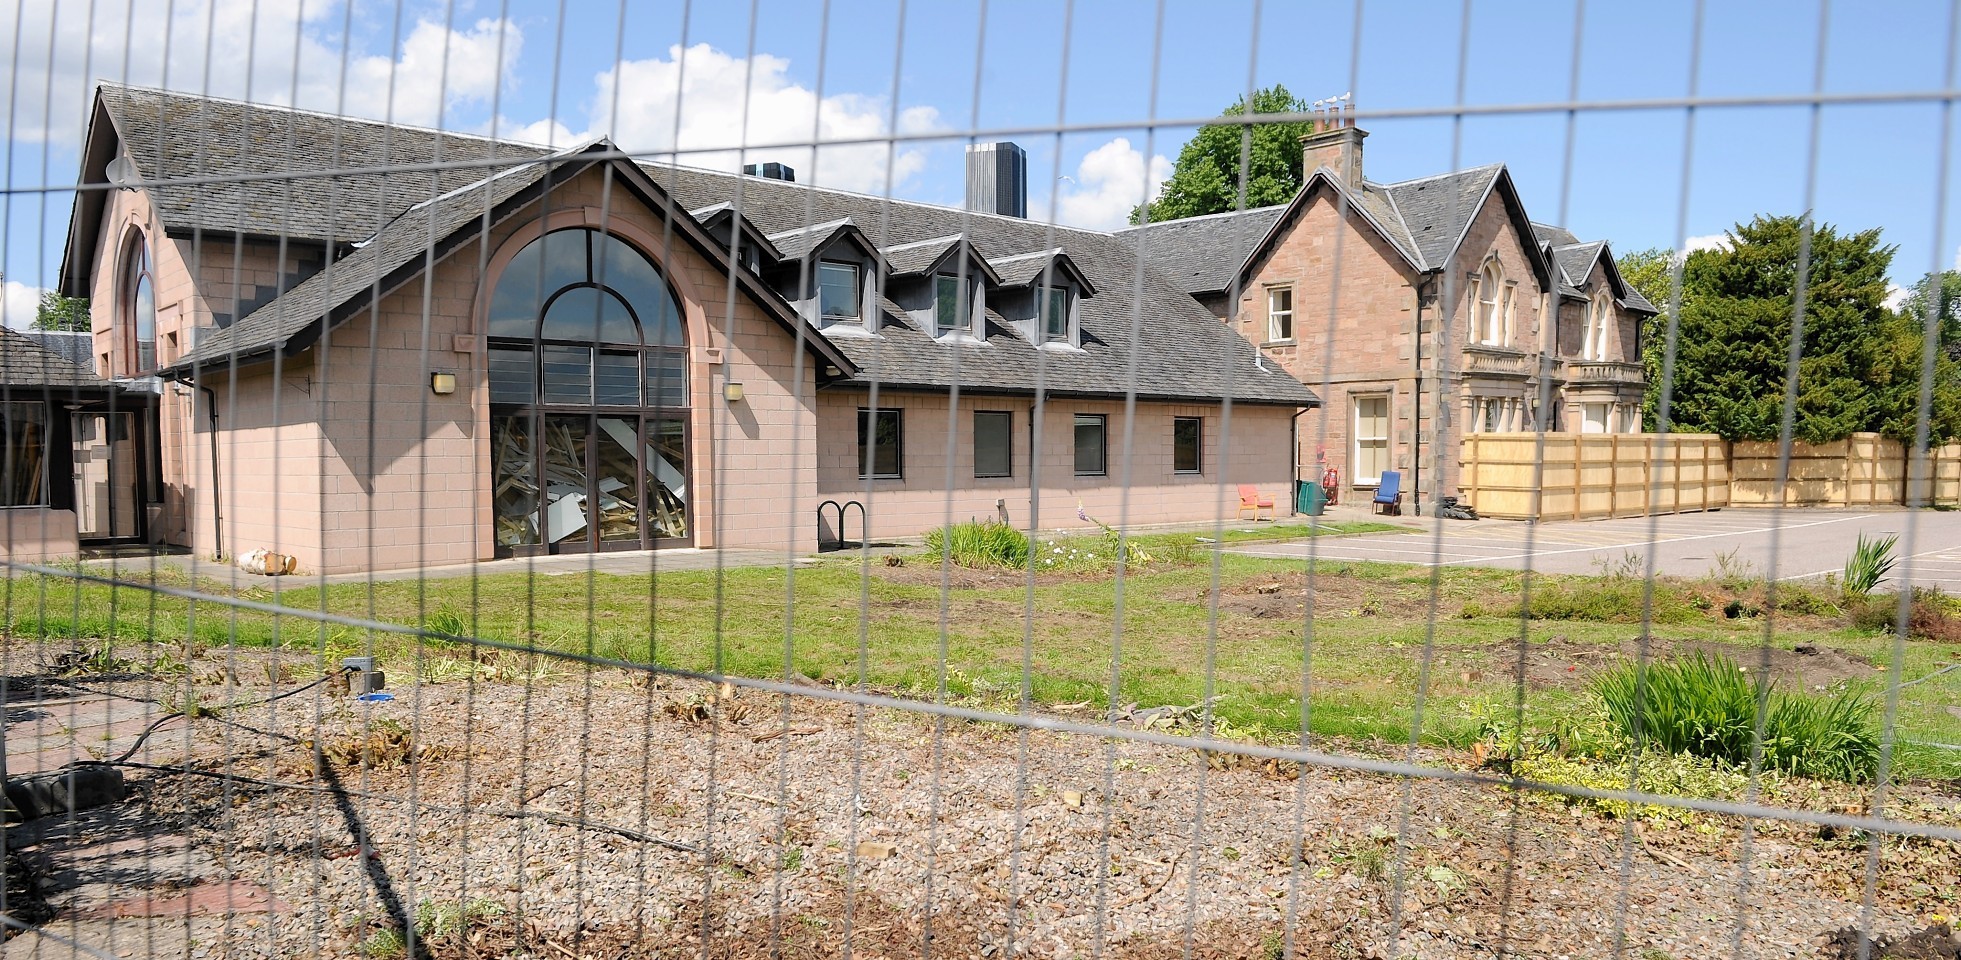 Highland Hospice Unit £13million Short Of Completion Press And Journal 